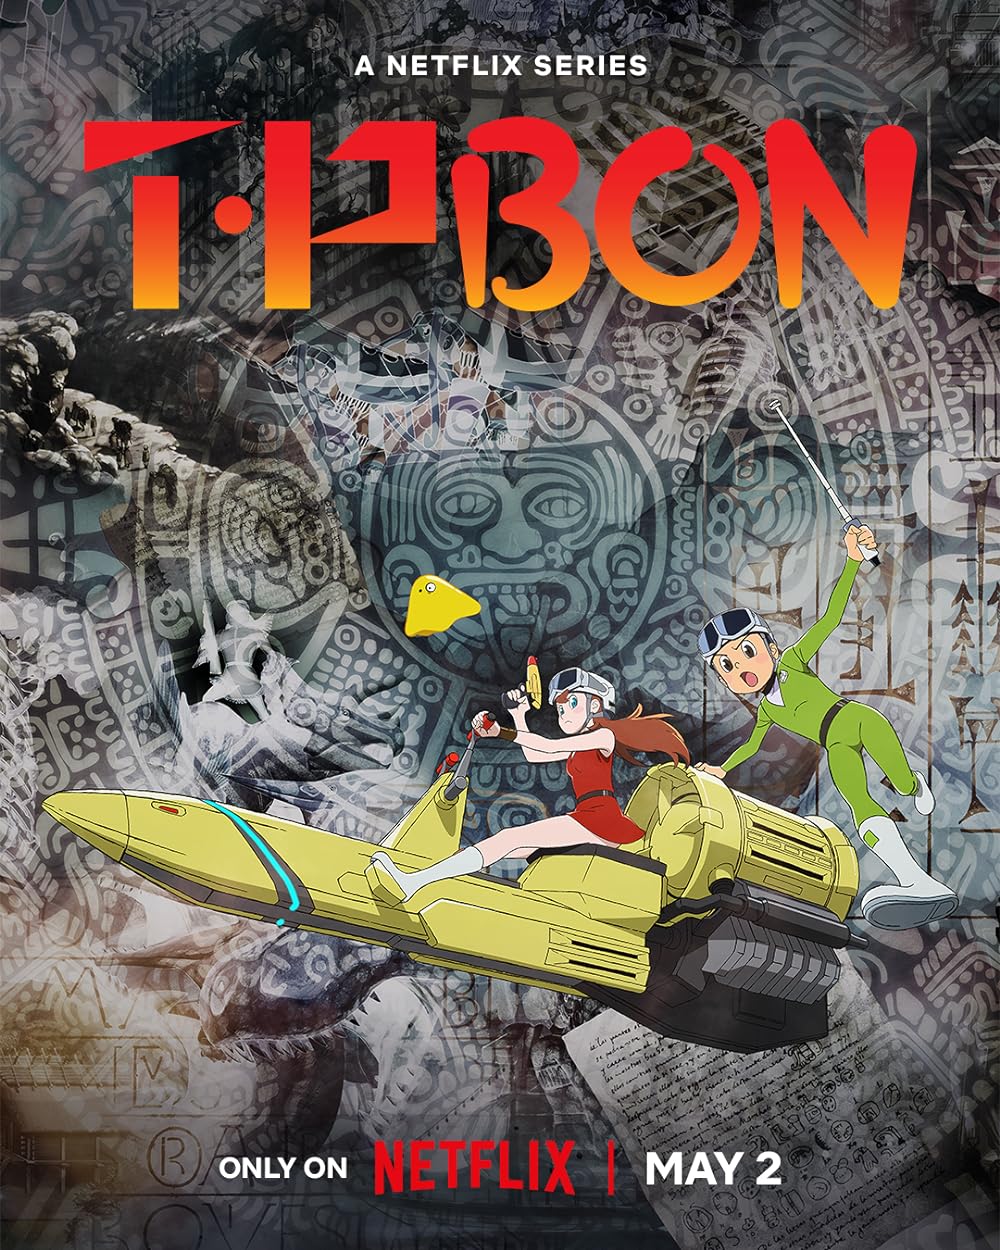 TP BON (Streaming on Netflix) - May 2Enter the world of time-traveling adventures with 